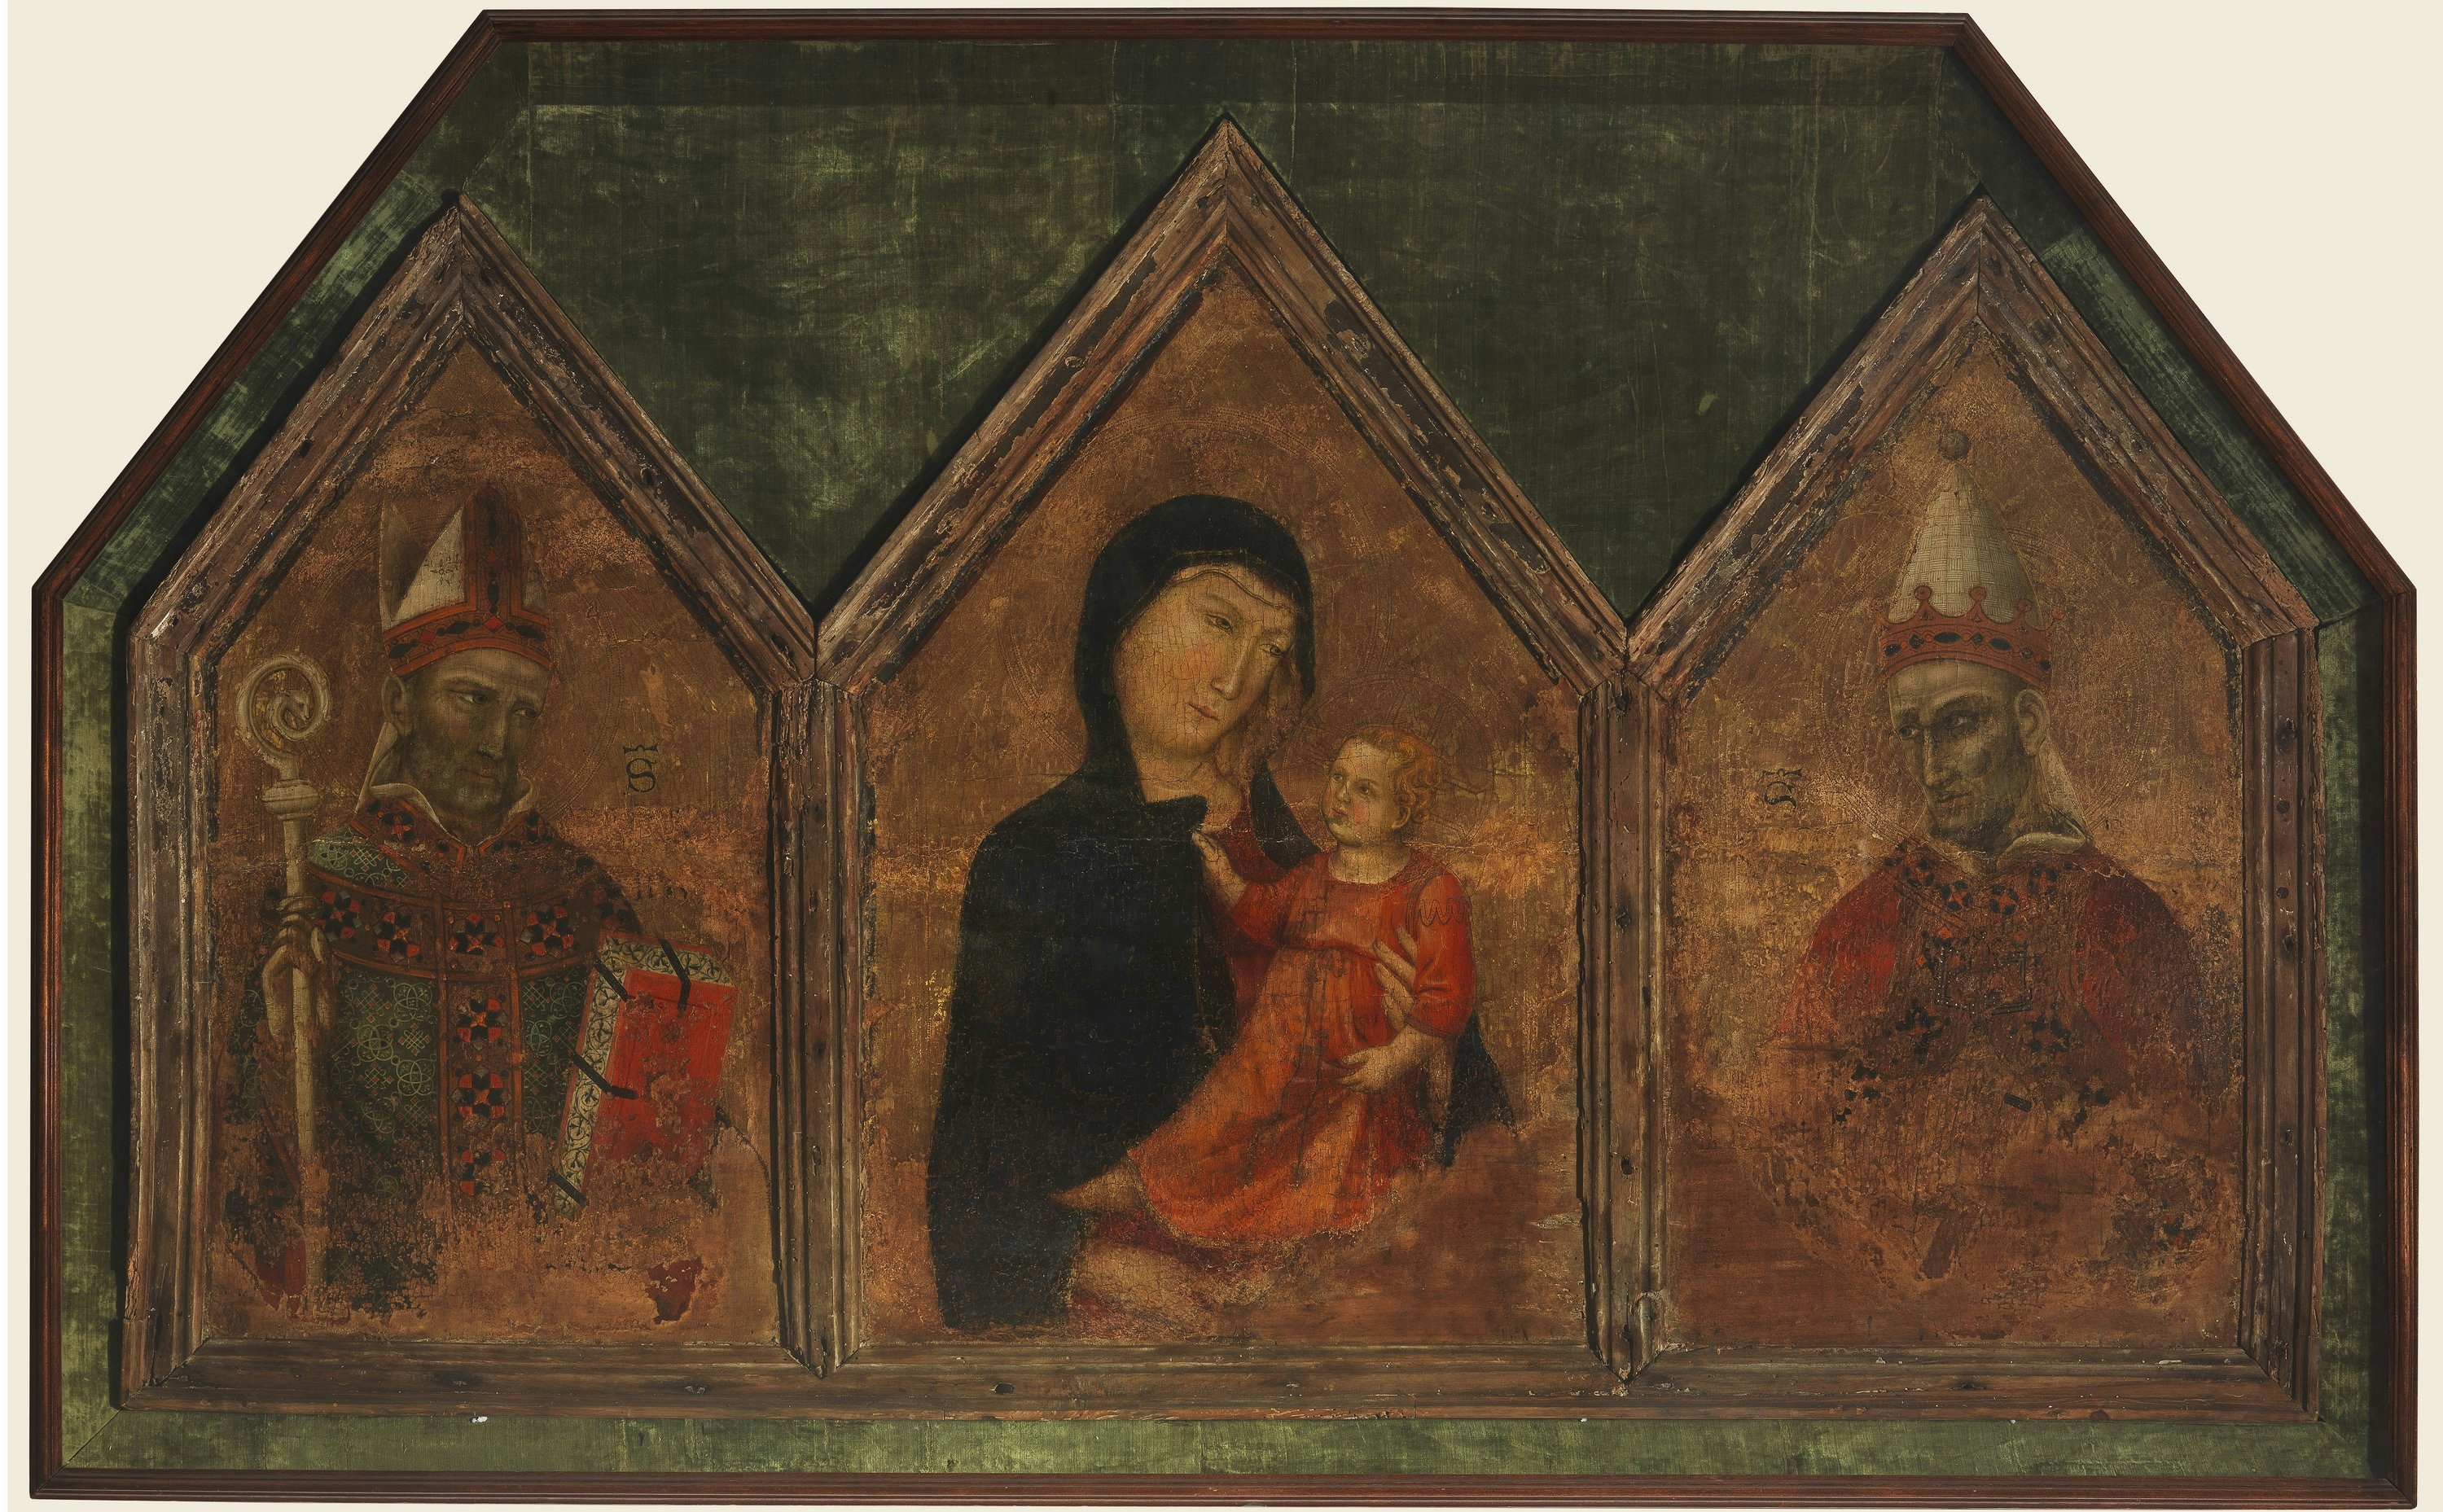 Madonna and Child, between a pope and a bishop